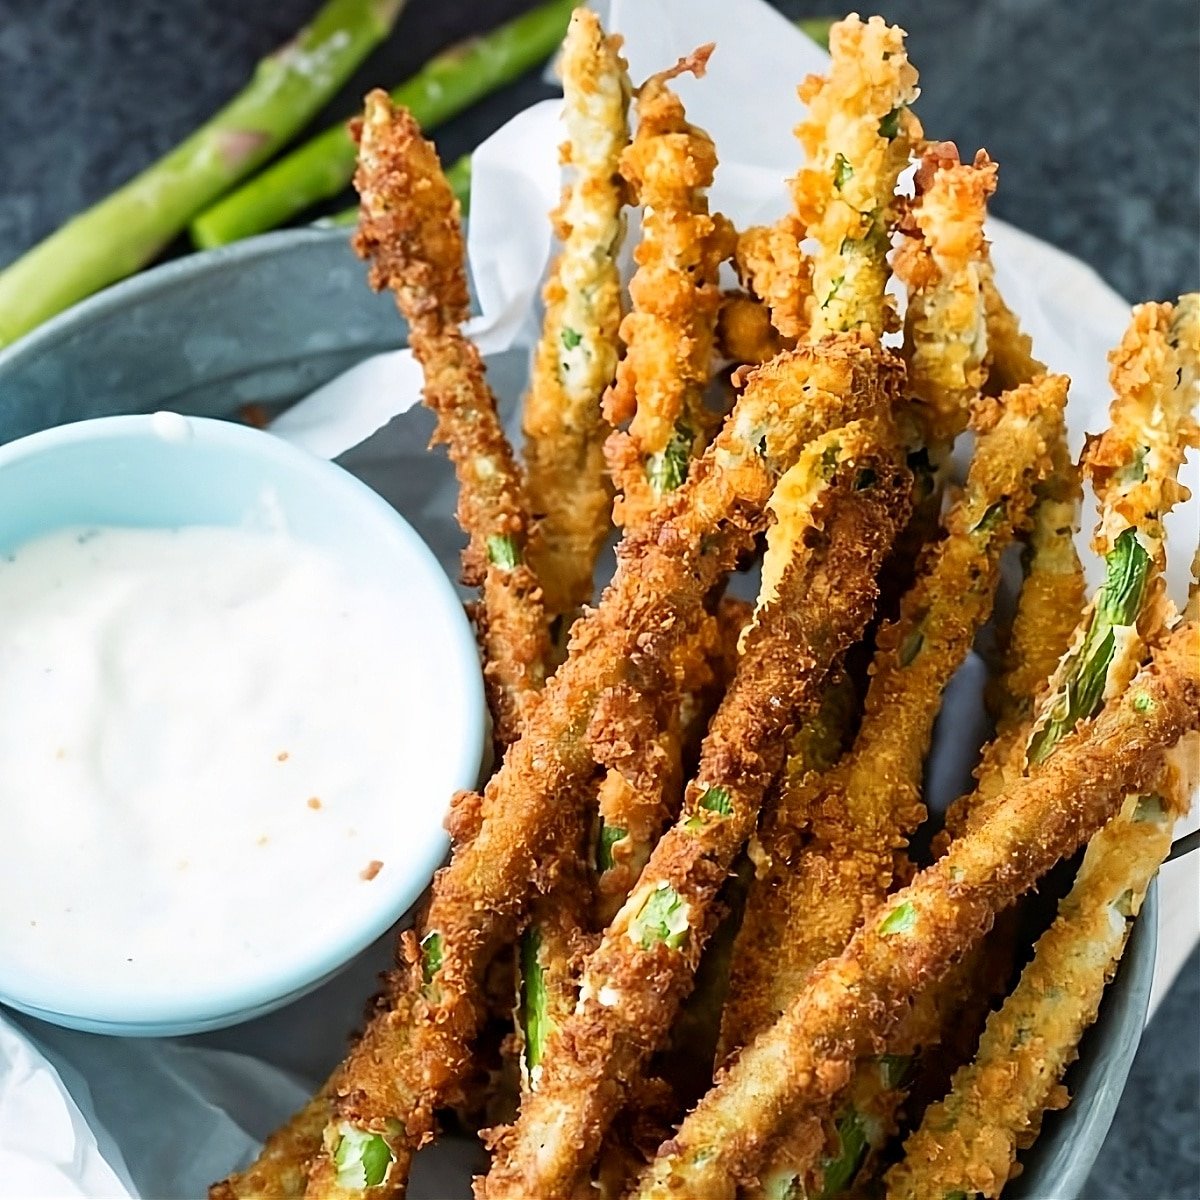 Fried Asparagus in a basket with ranch dressing in a bowl.